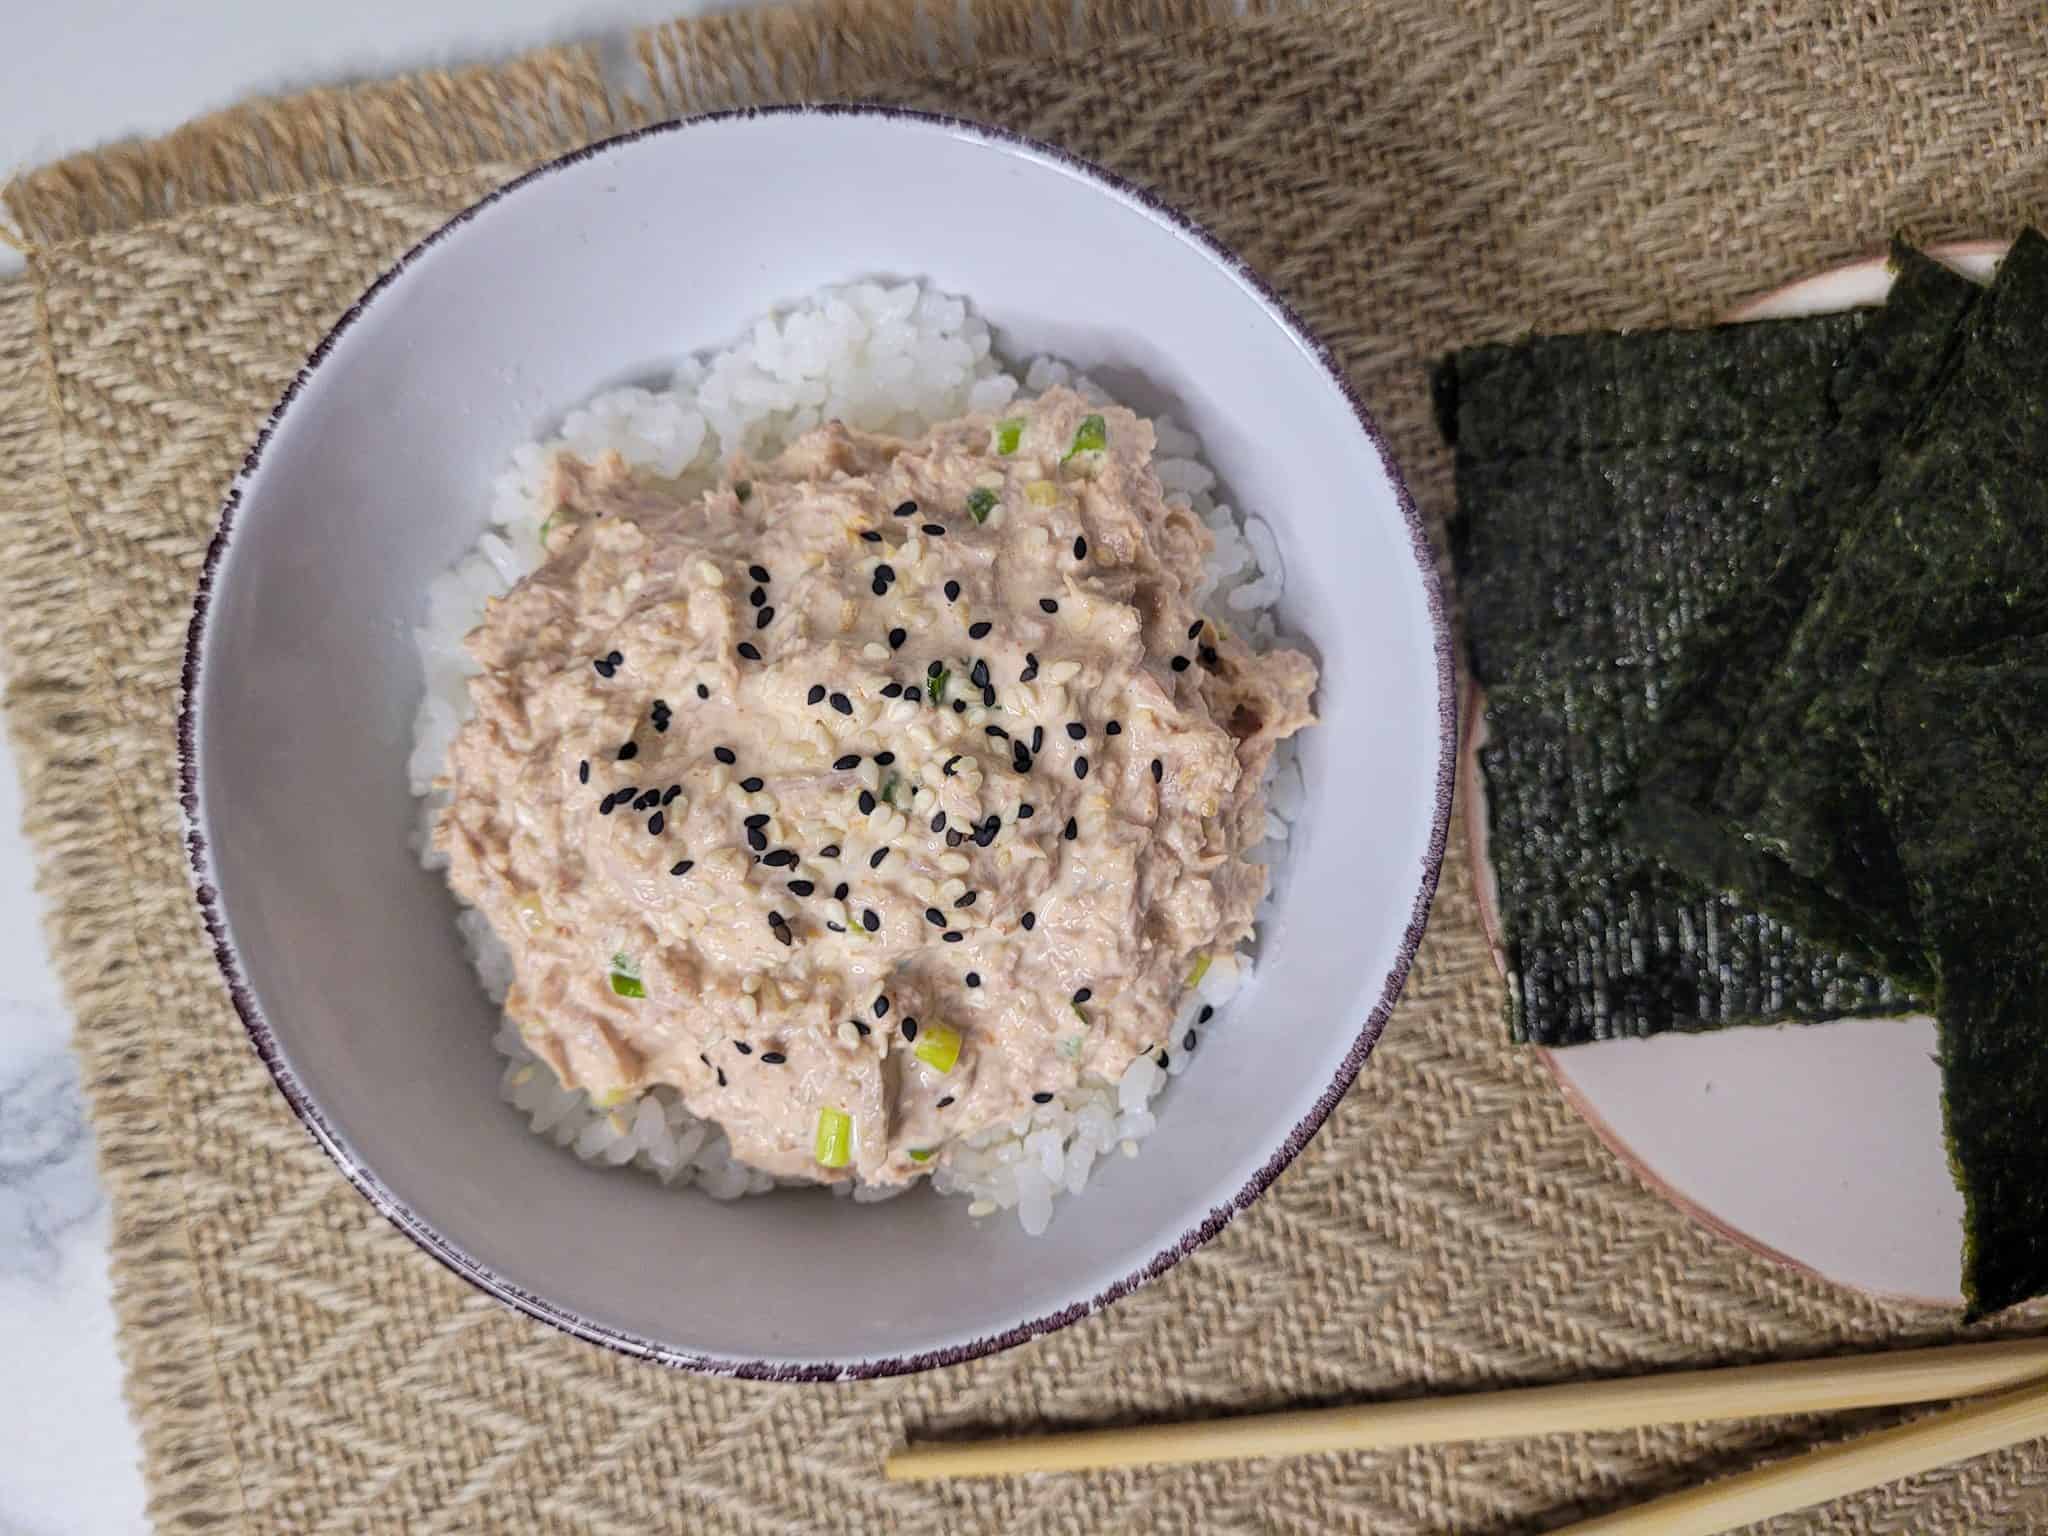 Canned spicy tuna bowl next to seaweed